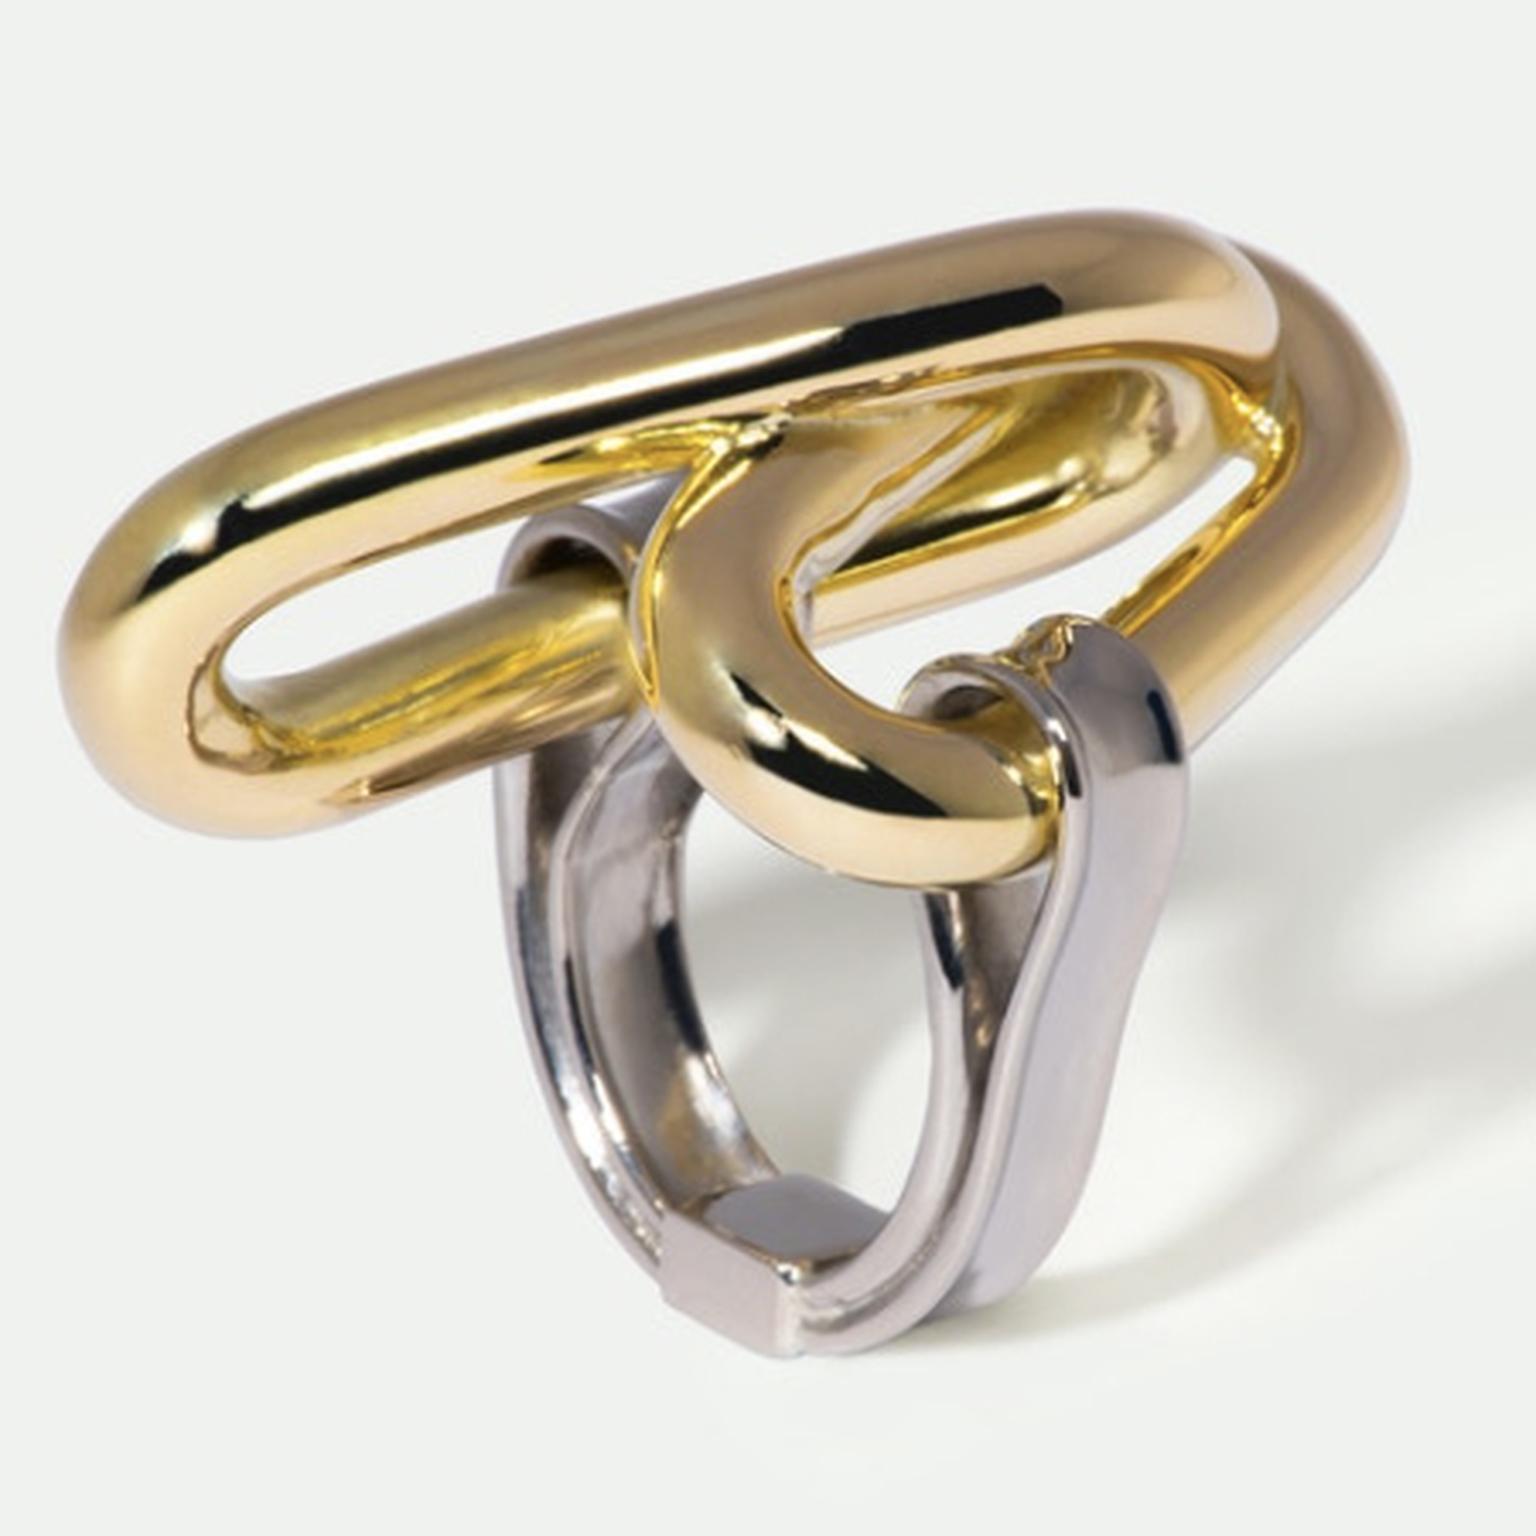 Unchained Ring from Hannah Martin